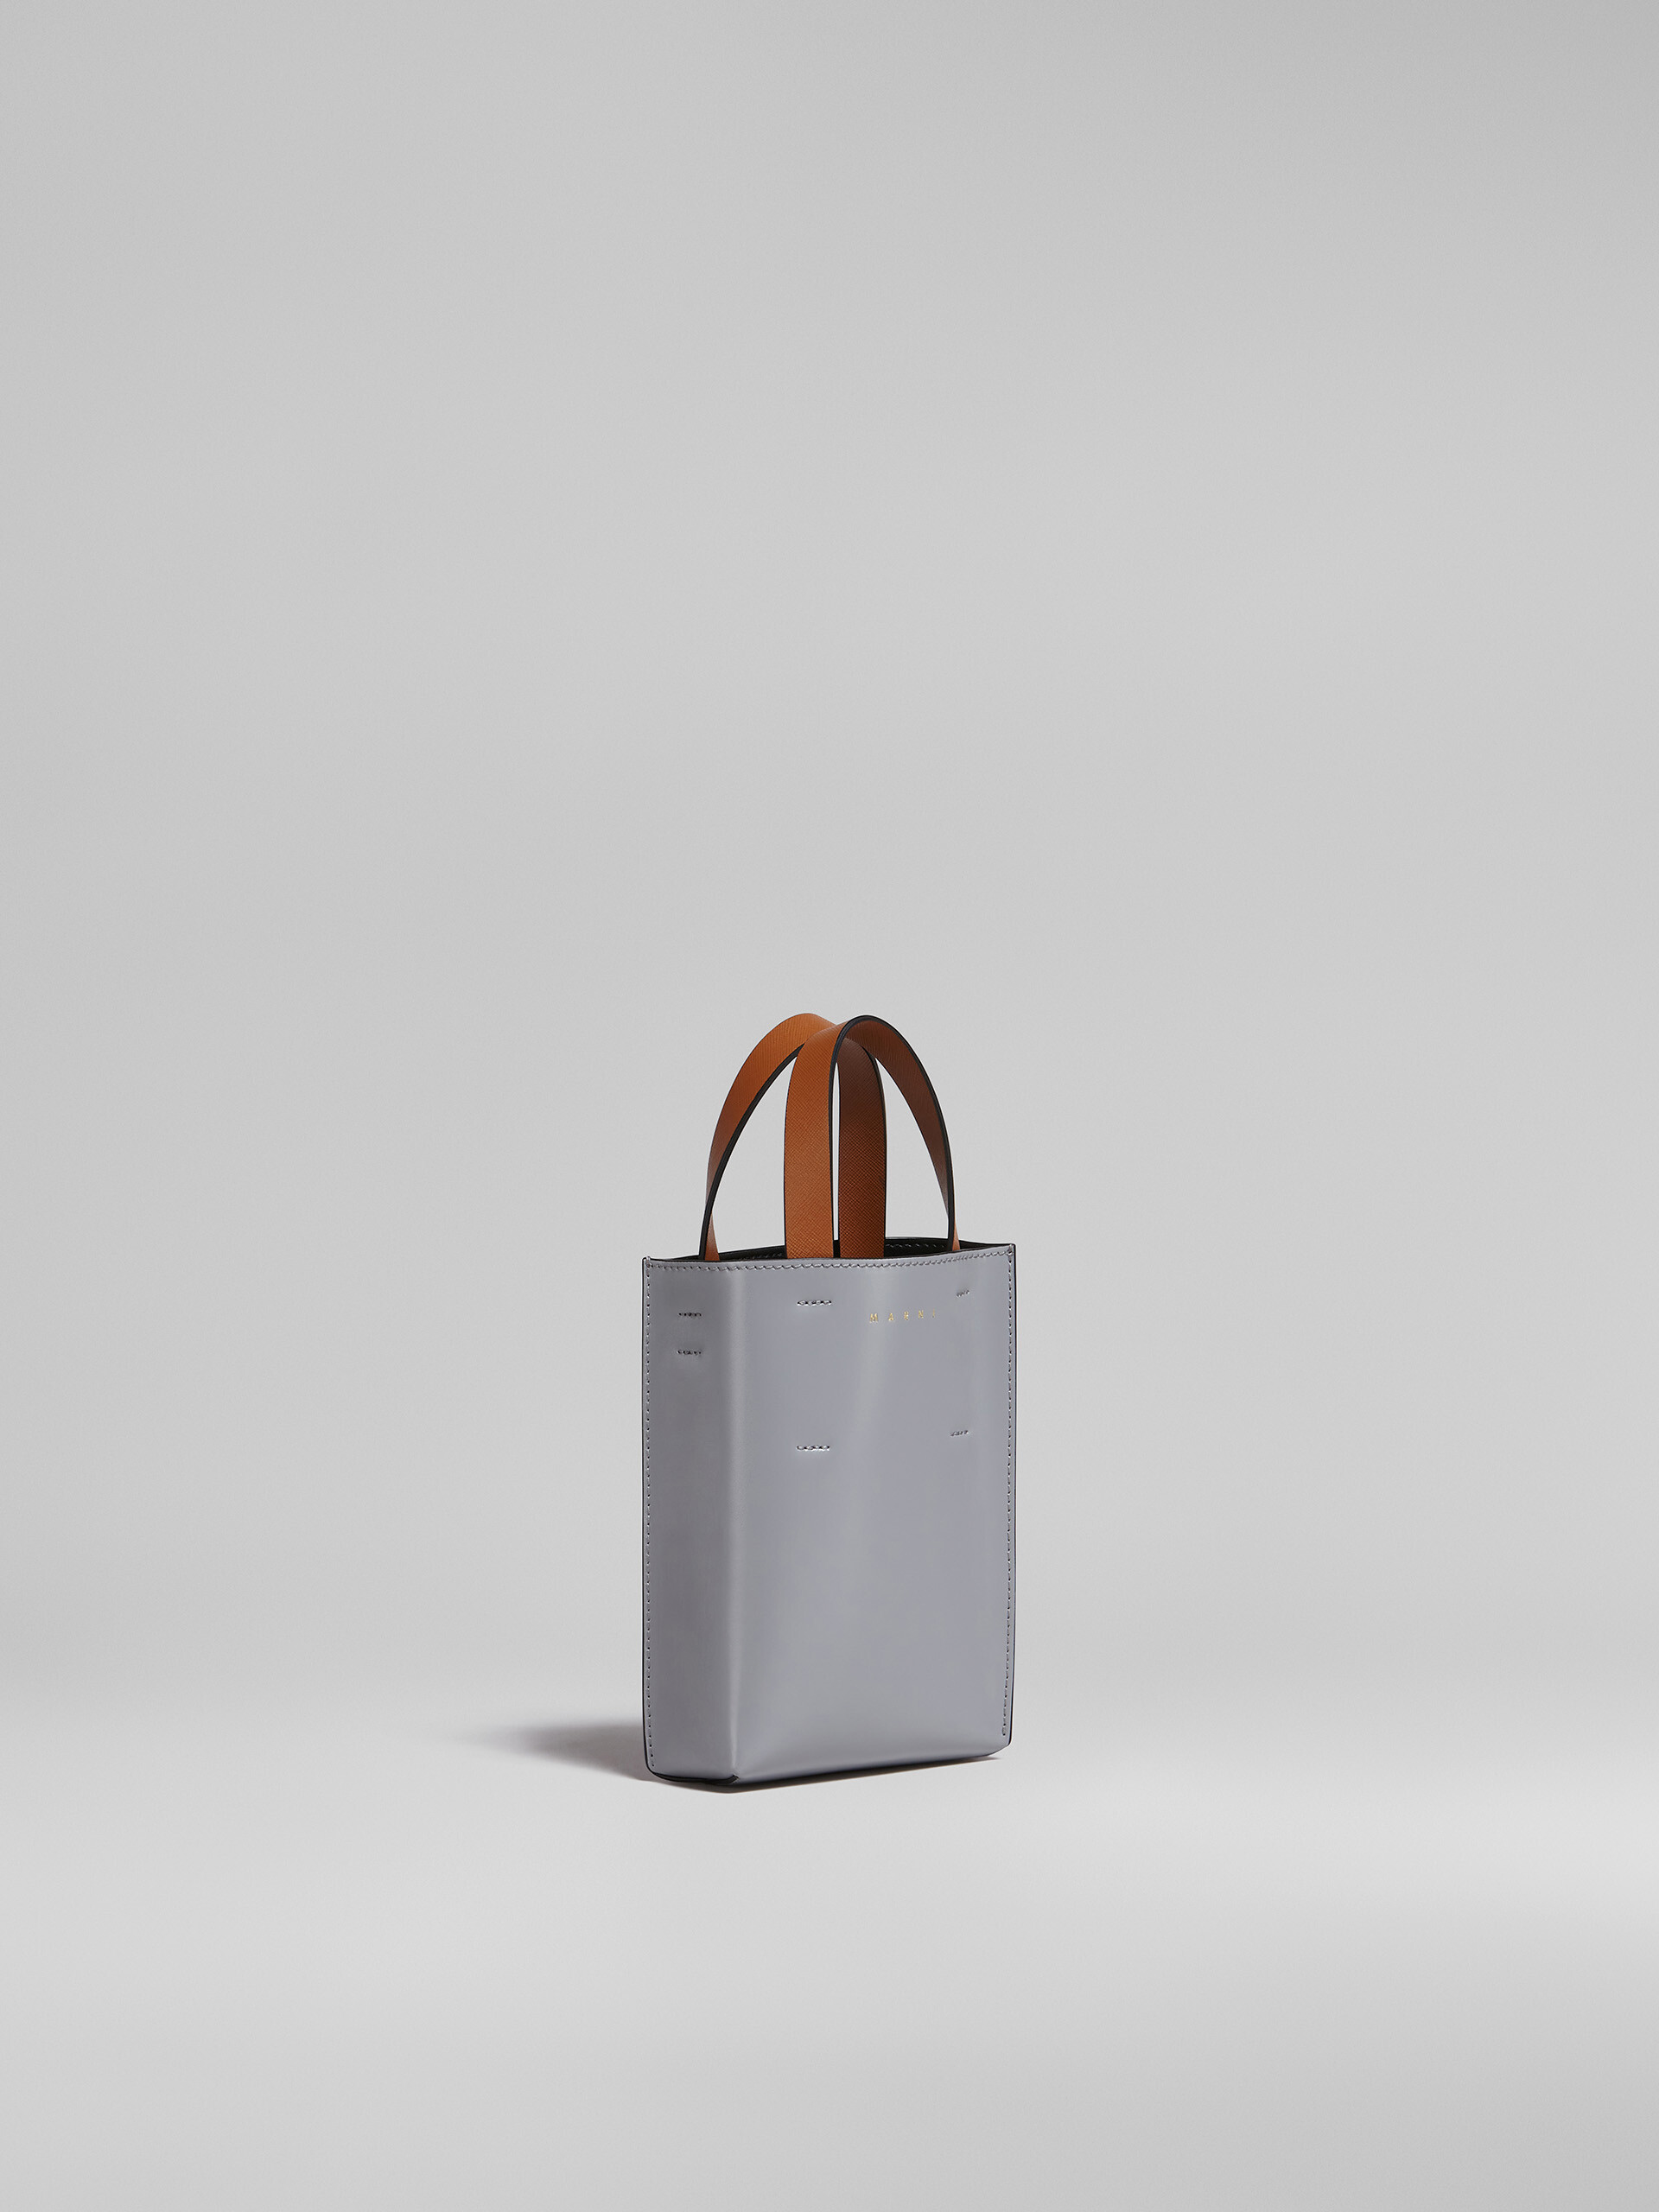 MUSEO nano bag in grey and purple leather - Shopping Bags - Image 6